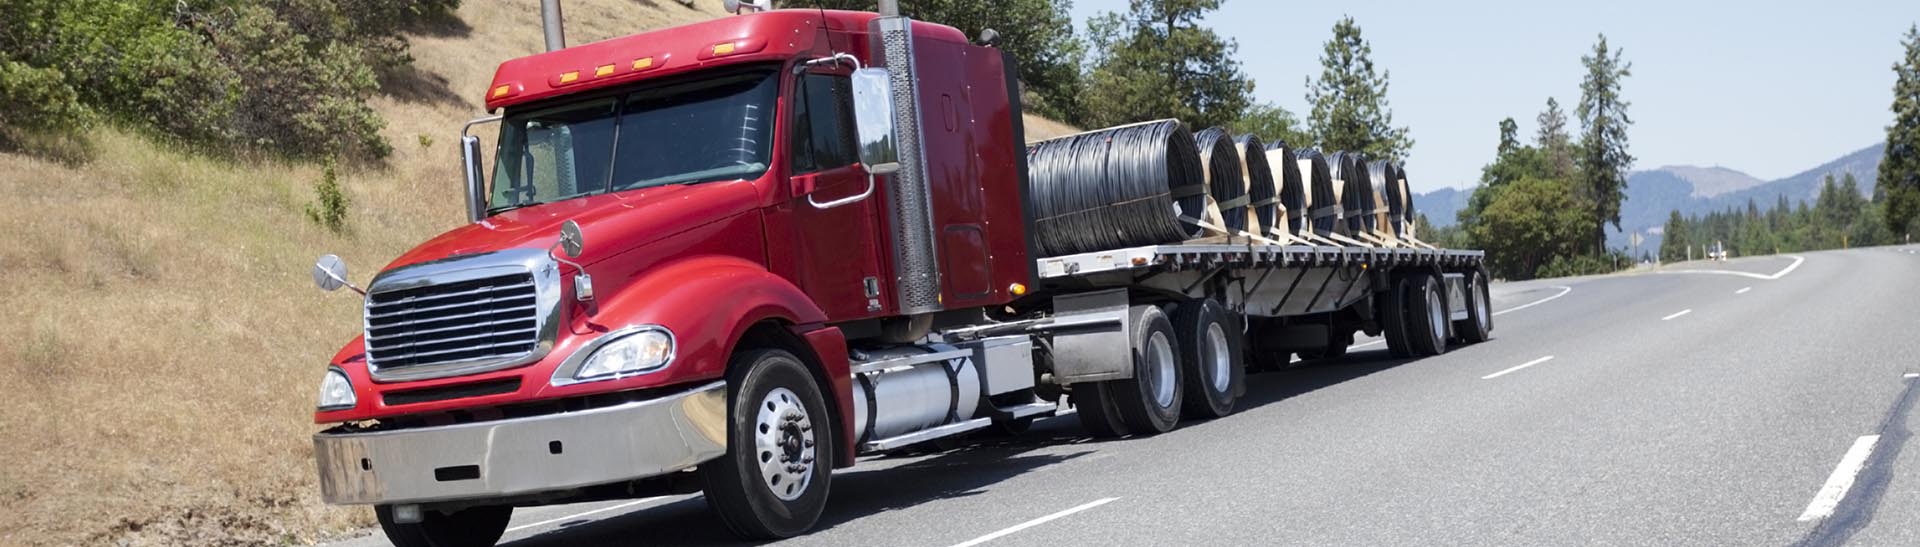 Missouri City Long Haul Trucking, Trucking Services and Trucking Company